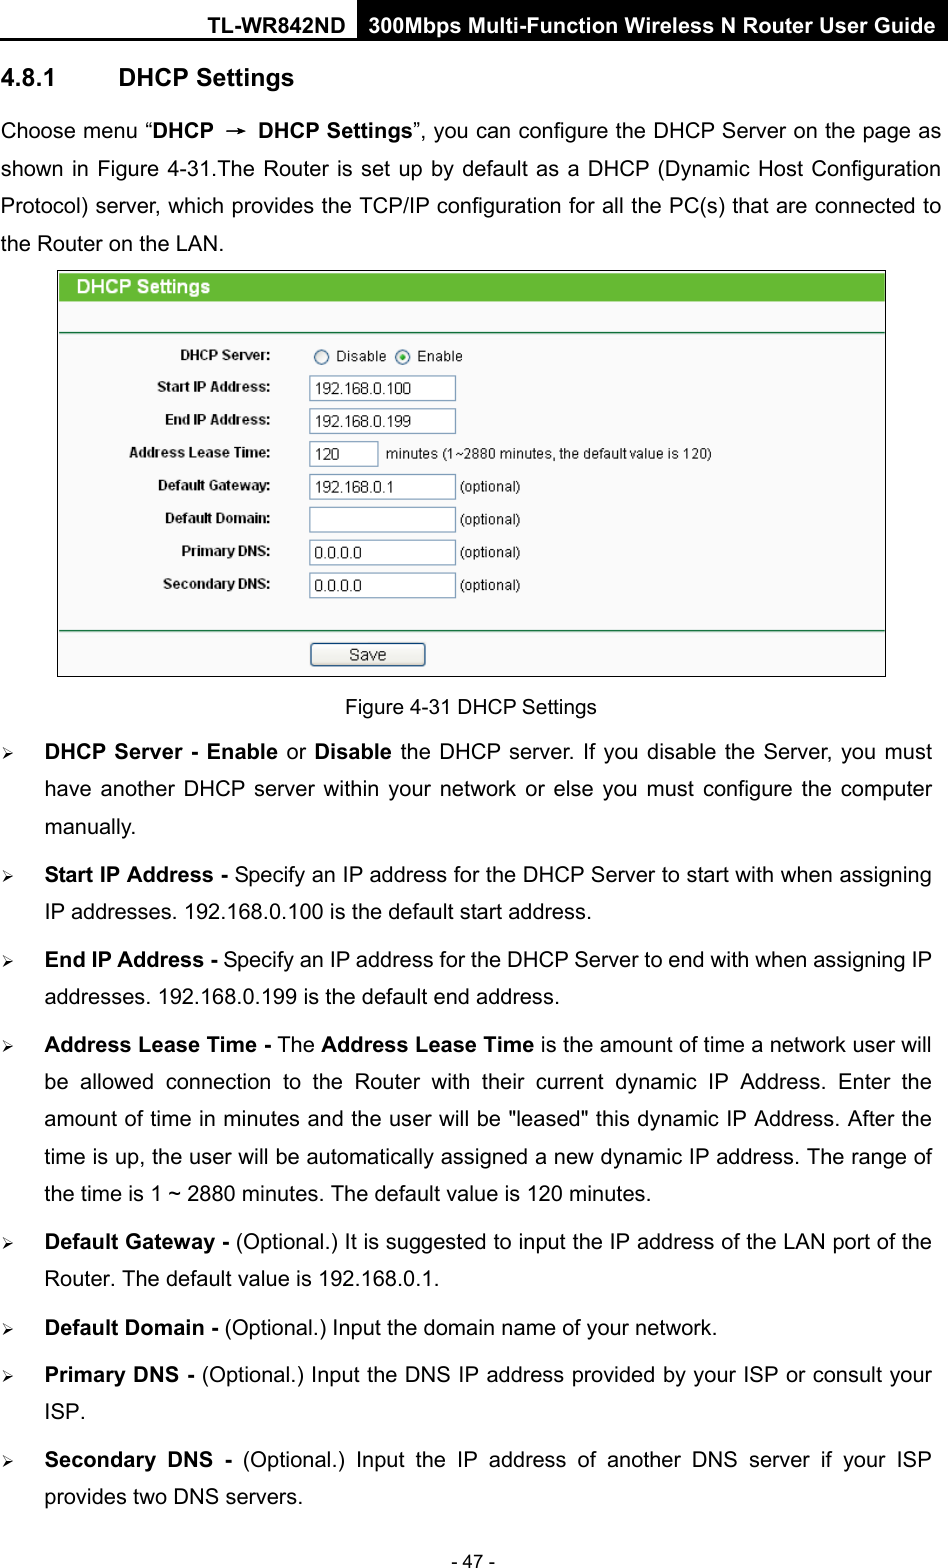 TL-WR842ND 300Mbps Multi-Function Wireless N Router User Guide  - 47 - 4.8.1 DHCP Settings Choose menu “DHCP → DHCP Settings”, you can configure the DHCP Server on the page as shown in Figure 4-31.The Router is set up by default as a DHCP (Dynamic Host Configuration Protocol) server, which provides the TCP/IP configuration for all the PC(s) that are connected to the Router on the LAN.    Figure 4-31 DHCP Settings  DHCP Server - Enable or Disable the DHCP server. If you disable the Server, you must have another DHCP server within your network or else you must configure the computer manually.  Start IP Address - Specify an IP address for the DHCP Server to start with when assigning IP addresses. 192.168.0.100 is the default start address.  End IP Address - Specify an IP address for the DHCP Server to end with when assigning IP addresses. 192.168.0.199 is the default end address.  Address Lease Time - The Address Lease Time is the amount of time a network user will be allowed connection to the Router with their current dynamic IP Address. Enter the amount of time in minutes and the user will be &quot;leased&quot; this dynamic IP Address. After the time is up, the user will be automatically assigned a new dynamic IP address. The range of the time is 1 ~ 2880 minutes. The default value is 120 minutes.  Default Gateway - (Optional.) It is suggested to input the IP address of the LAN port of the Router. The default value is 192.168.0.1.  Default Domain - (Optional.) Input the domain name of your network.  Primary DNS - (Optional.) Input the DNS IP address provided by your ISP or consult your ISP.  Secondary DNS -  (Optional.) Input the IP address of another DNS server if your ISP provides two DNS servers. 